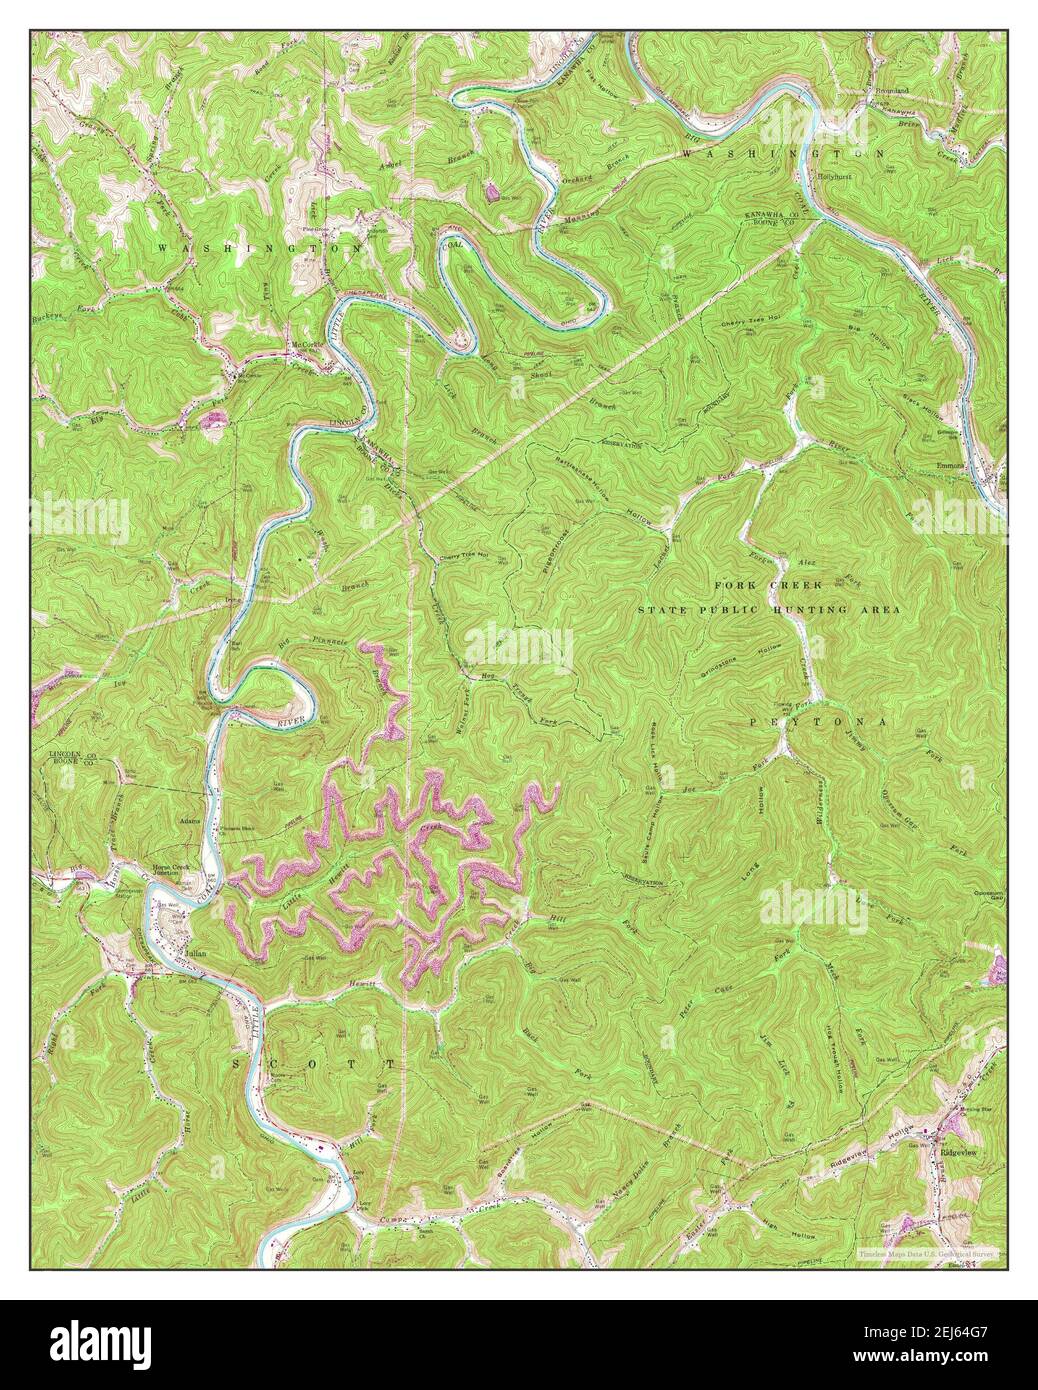 Julian, West Virginia, map 1962, 1:24000, United States of America by Timeless Maps, data U.S. Geological Survey Stock Photo